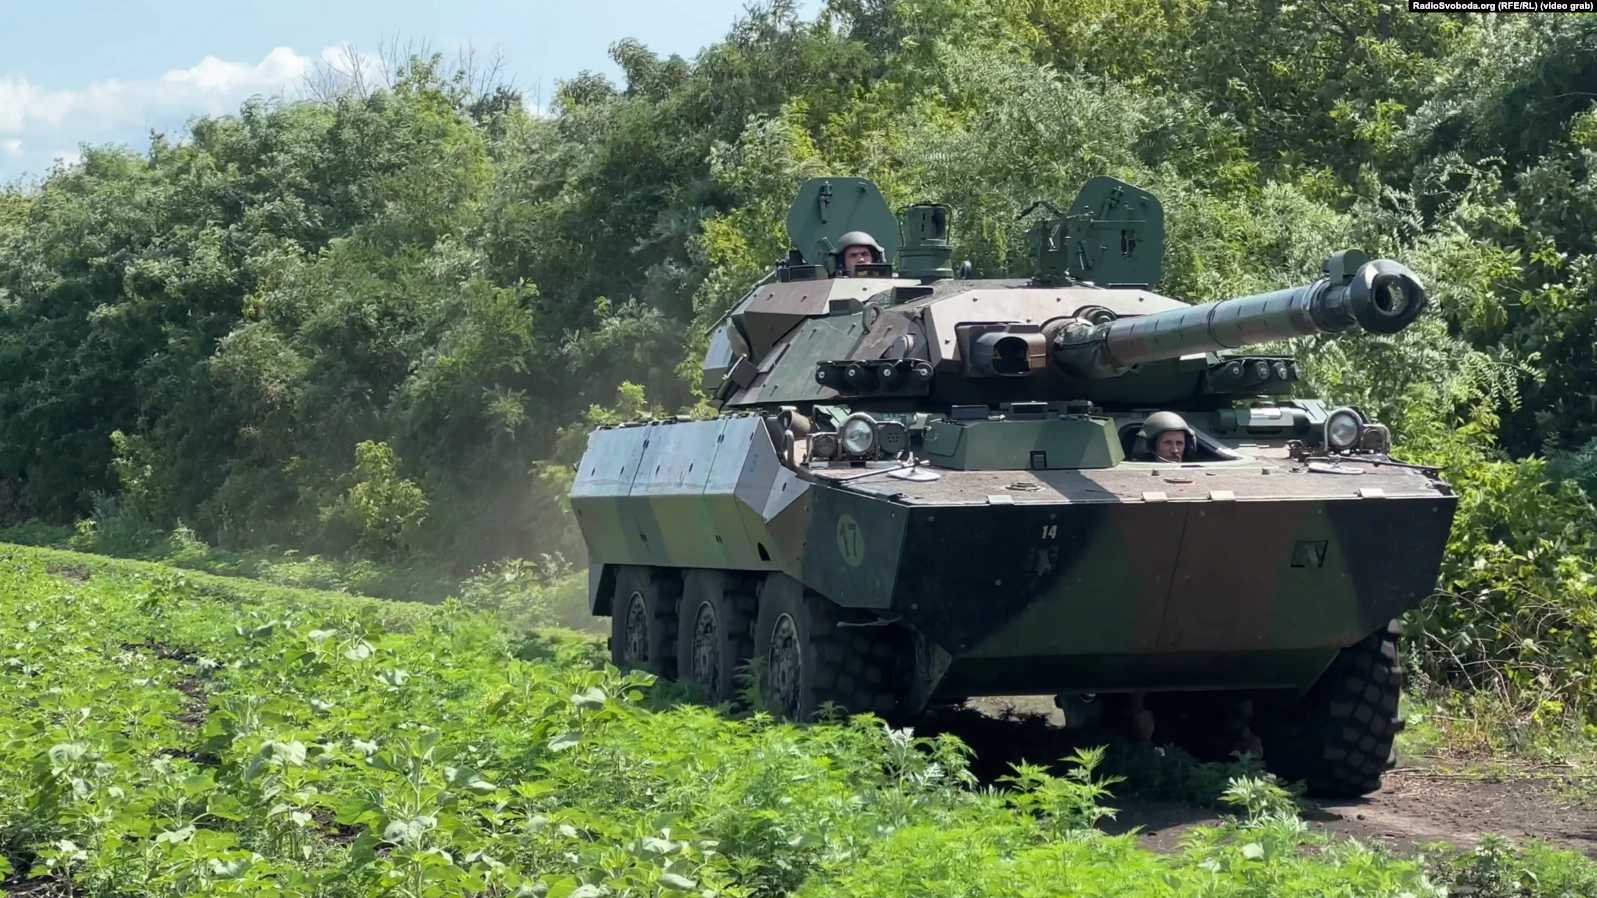 AMX-10RC combat units participate in the counteroffensive actions of the Ukrainian Armed Forces in the south